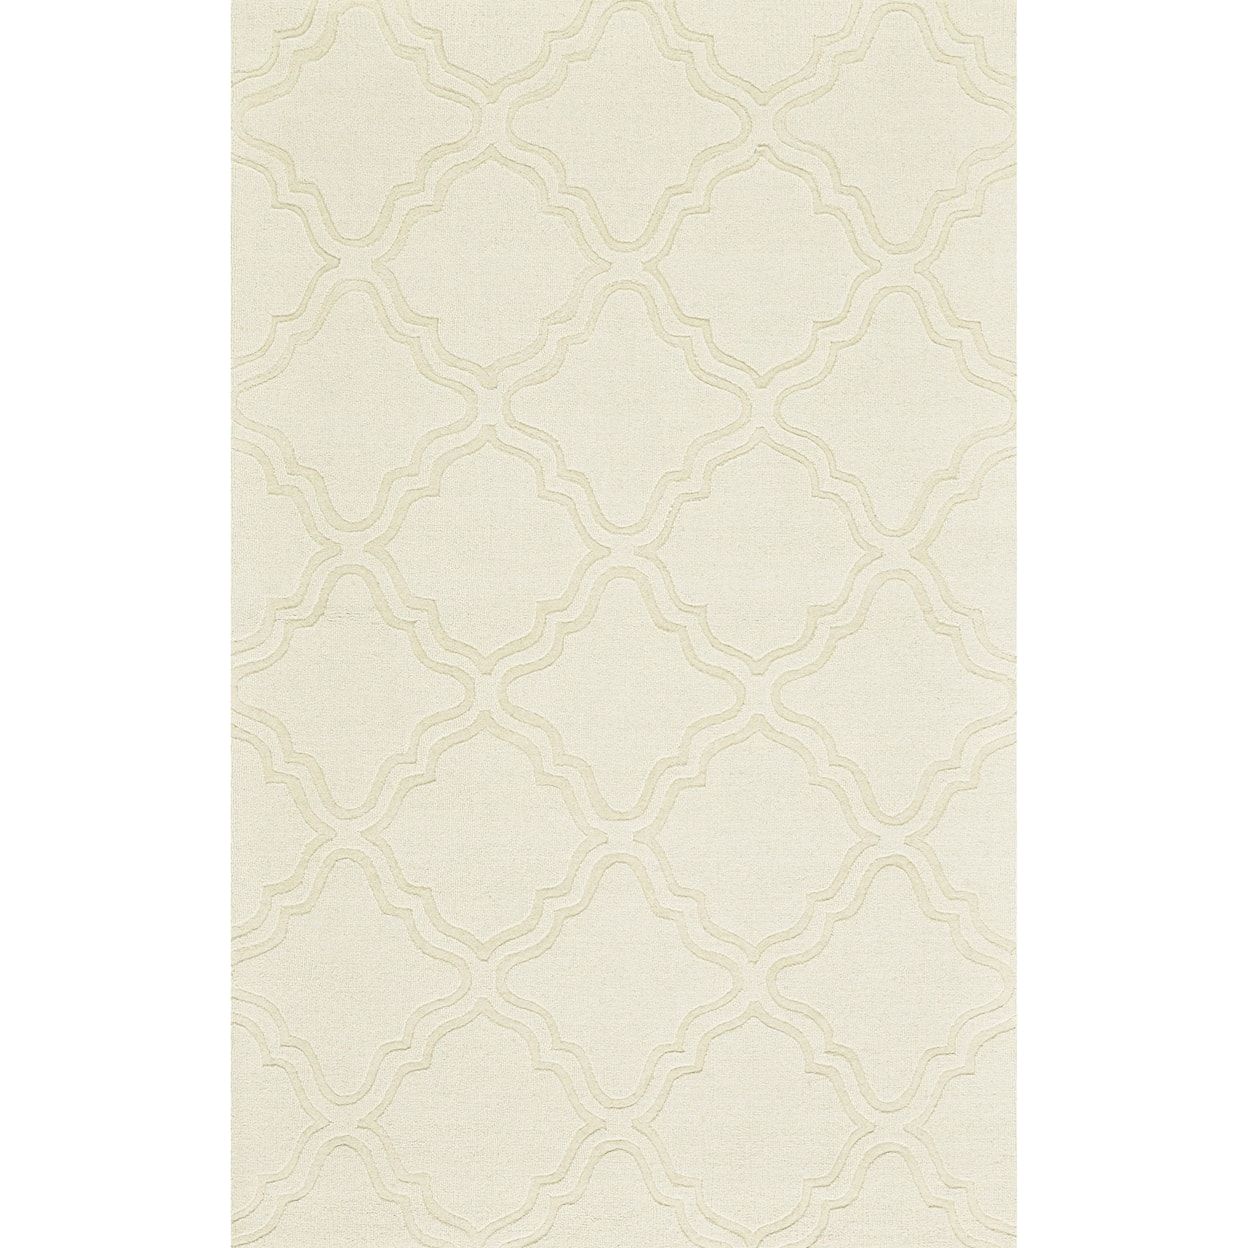 Feizy Rugs Soma Ivory 2' x 3' Area Rug